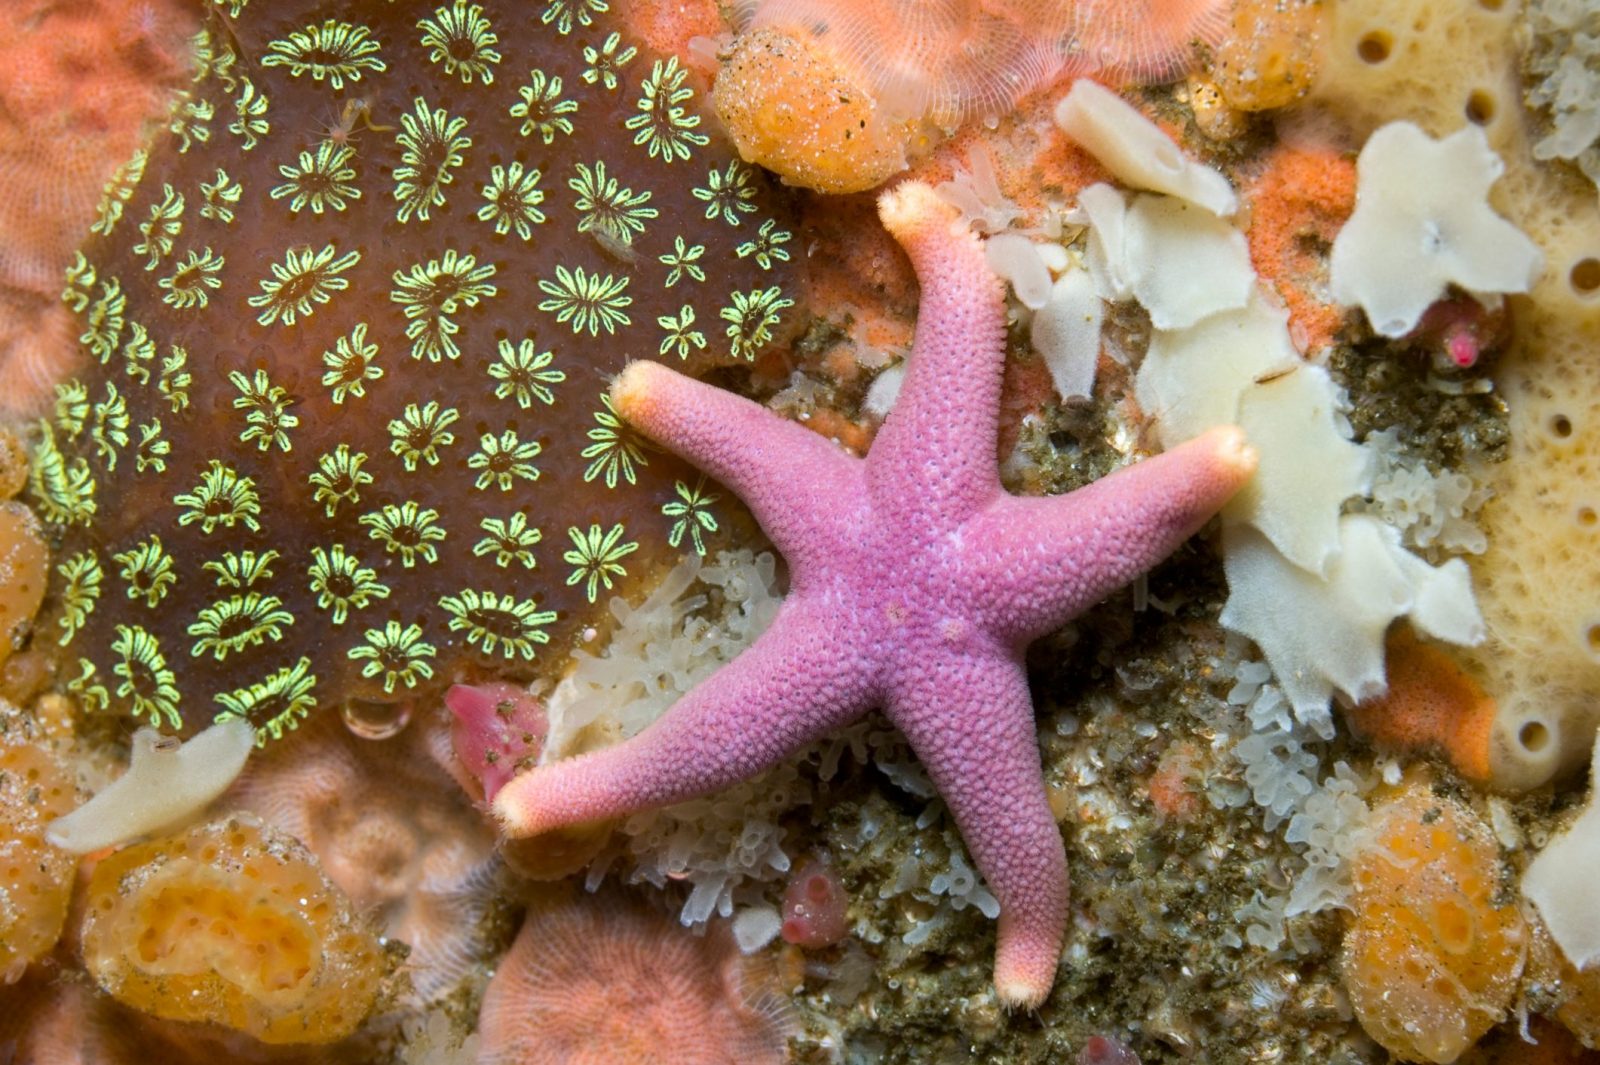 If You Can Get 15/20 on This Quiz on Your First Try, You Definitely Know a Lot About the Human Body Starfish